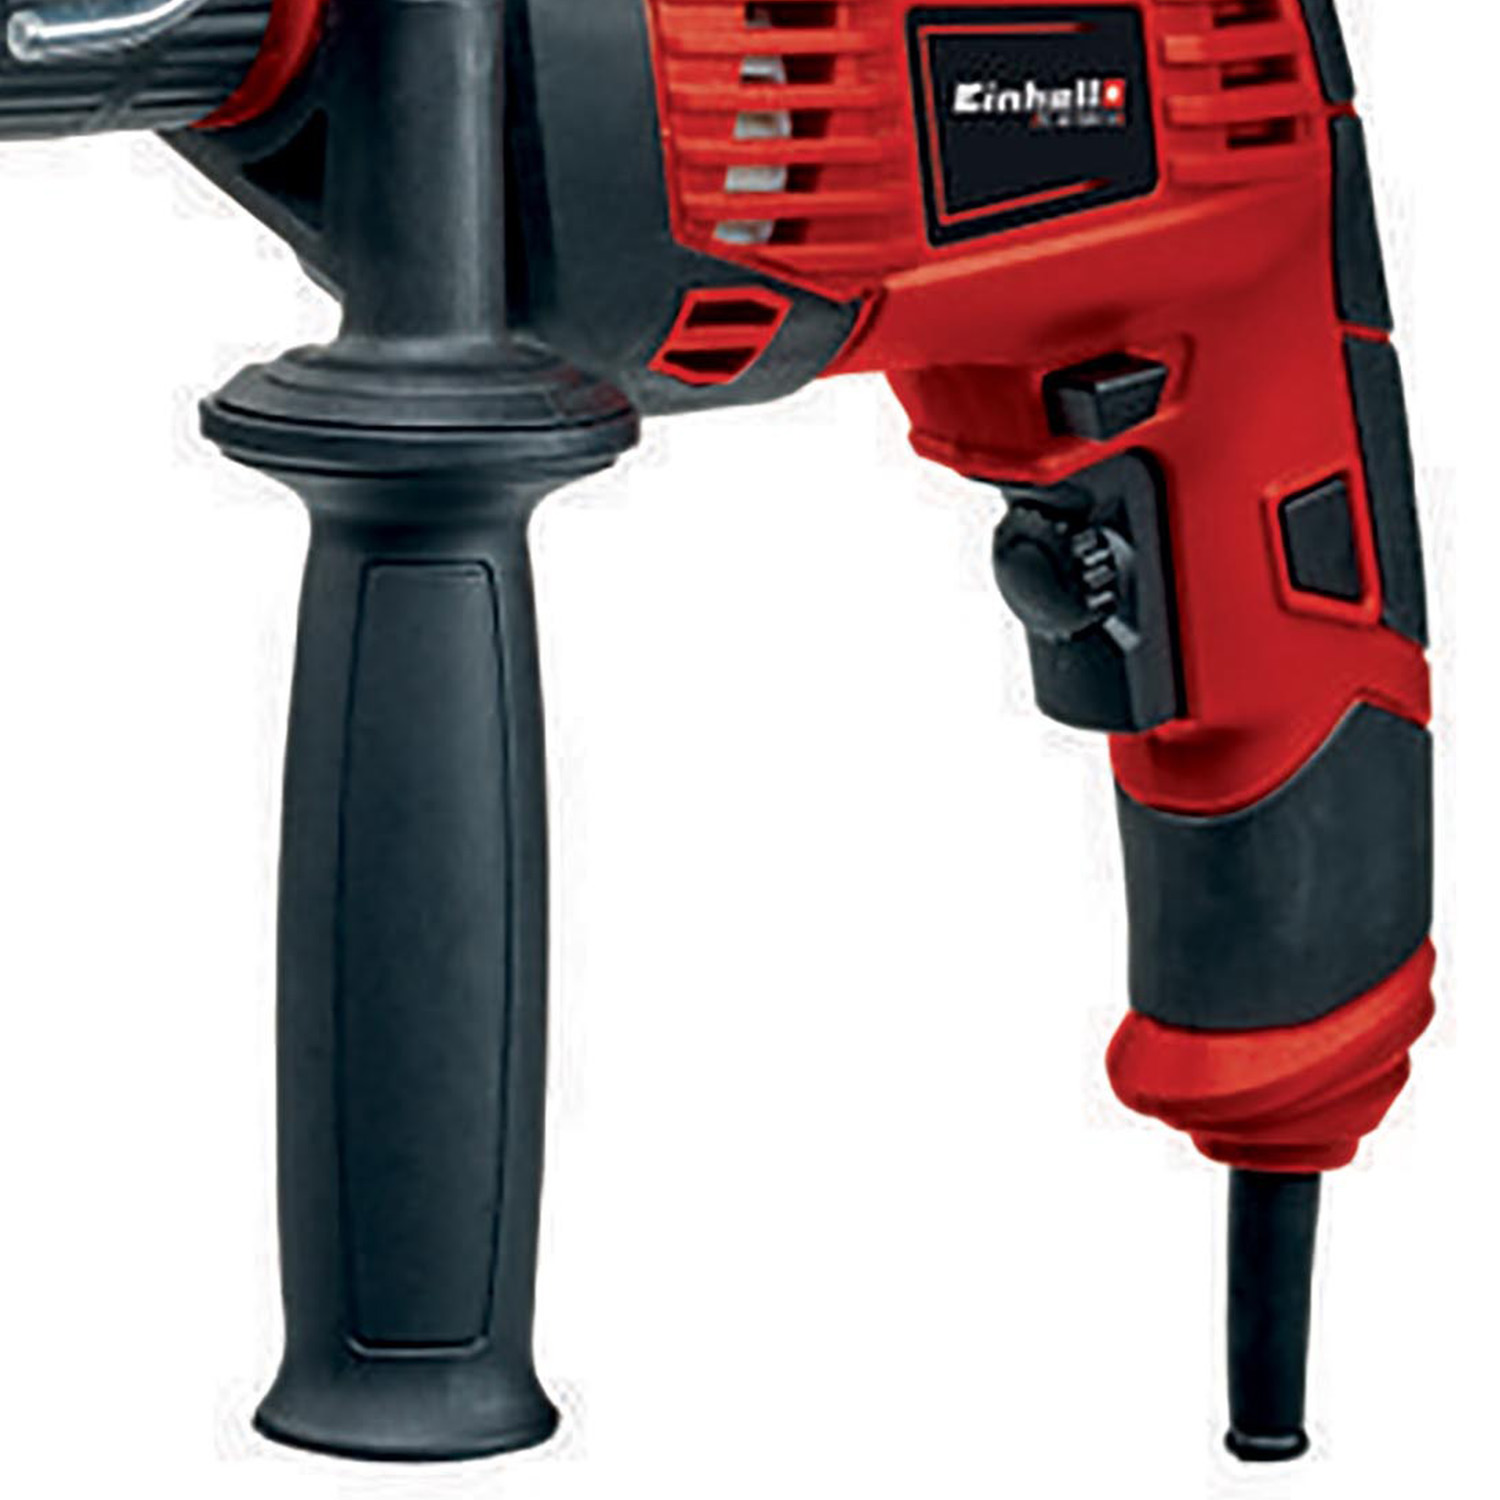 Einhell Impact Drill with Bit Set and Case Image 6